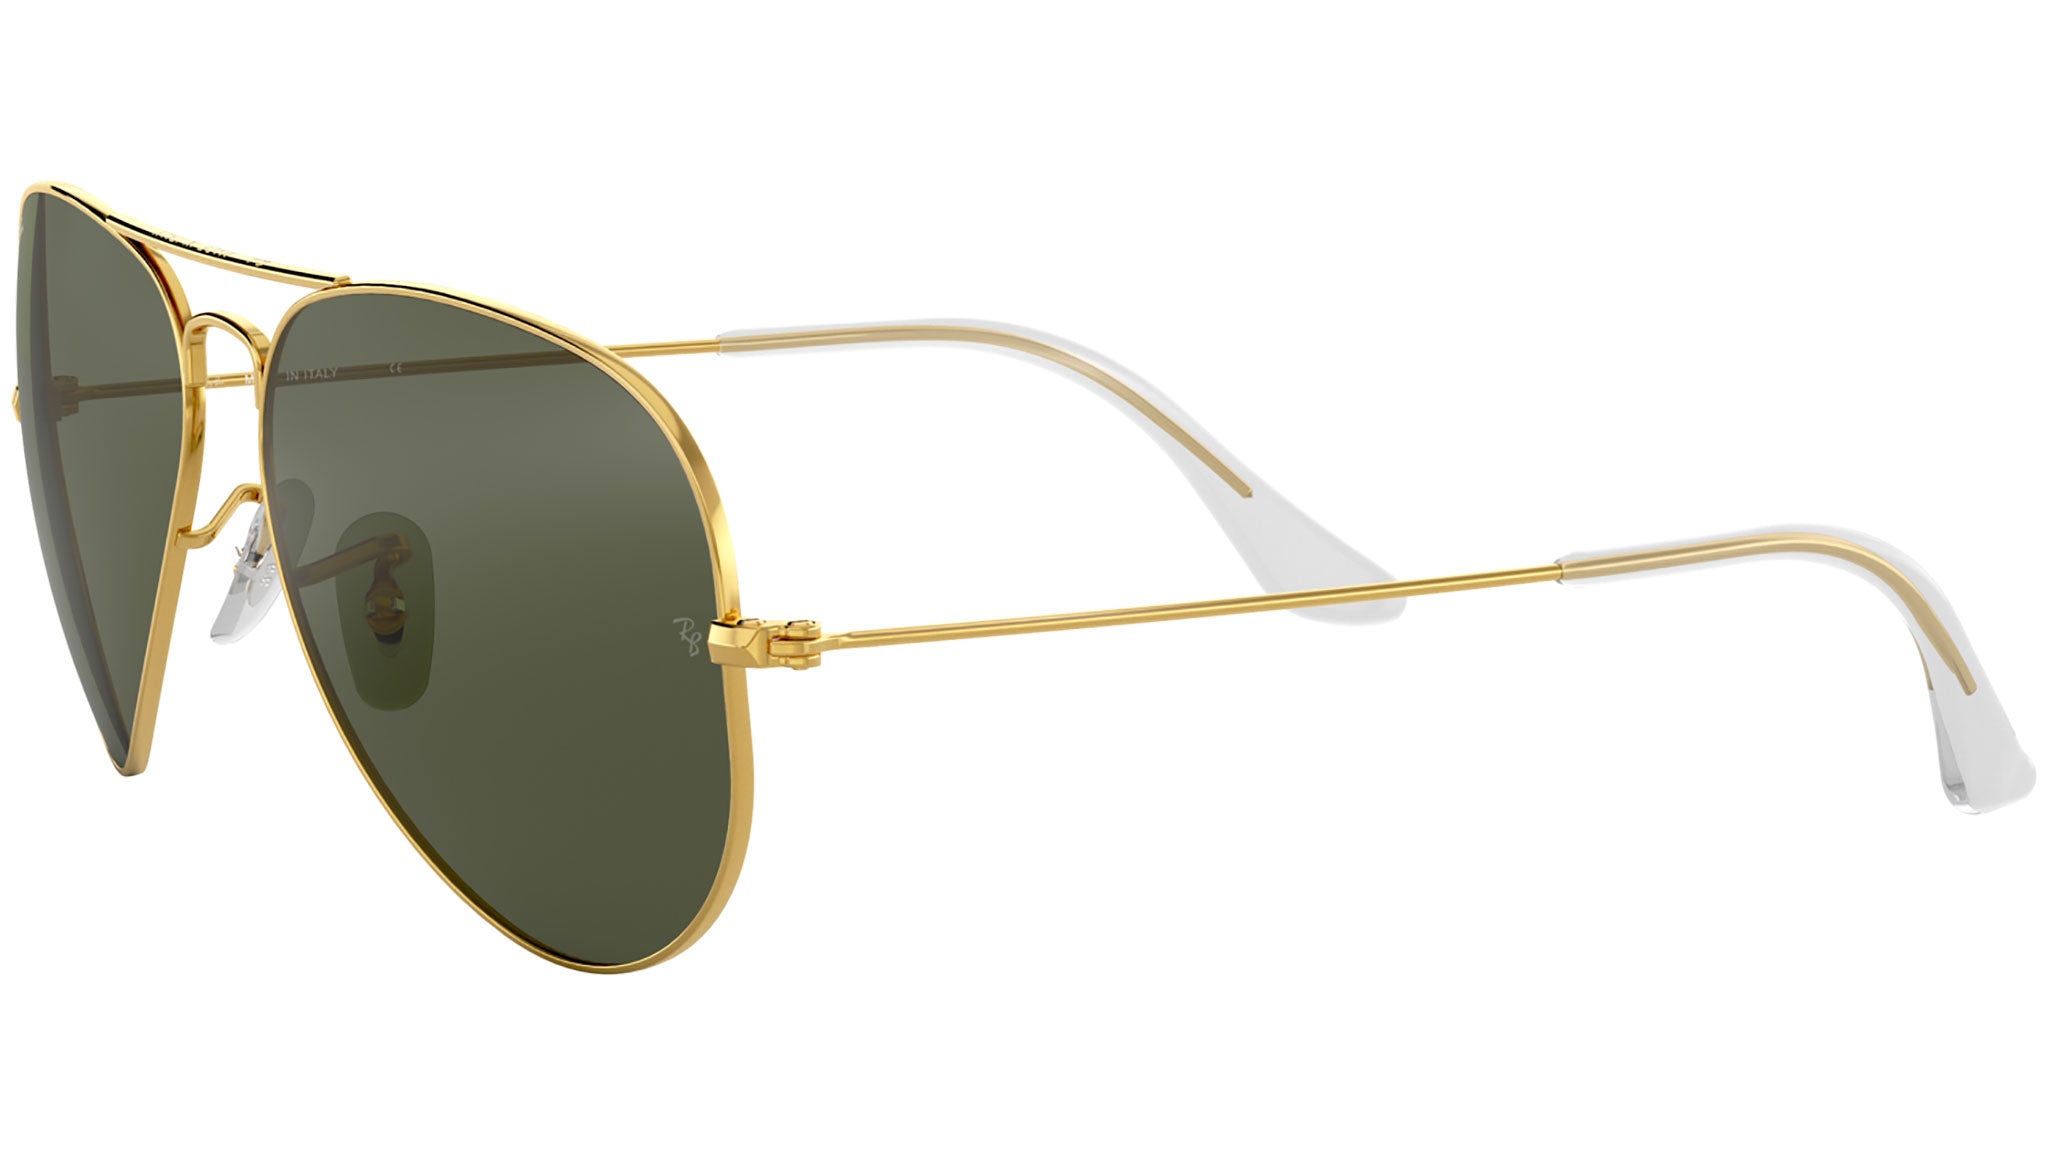 AVIATOR CLASSIC Sunglasses in Gold and Black - RB3025